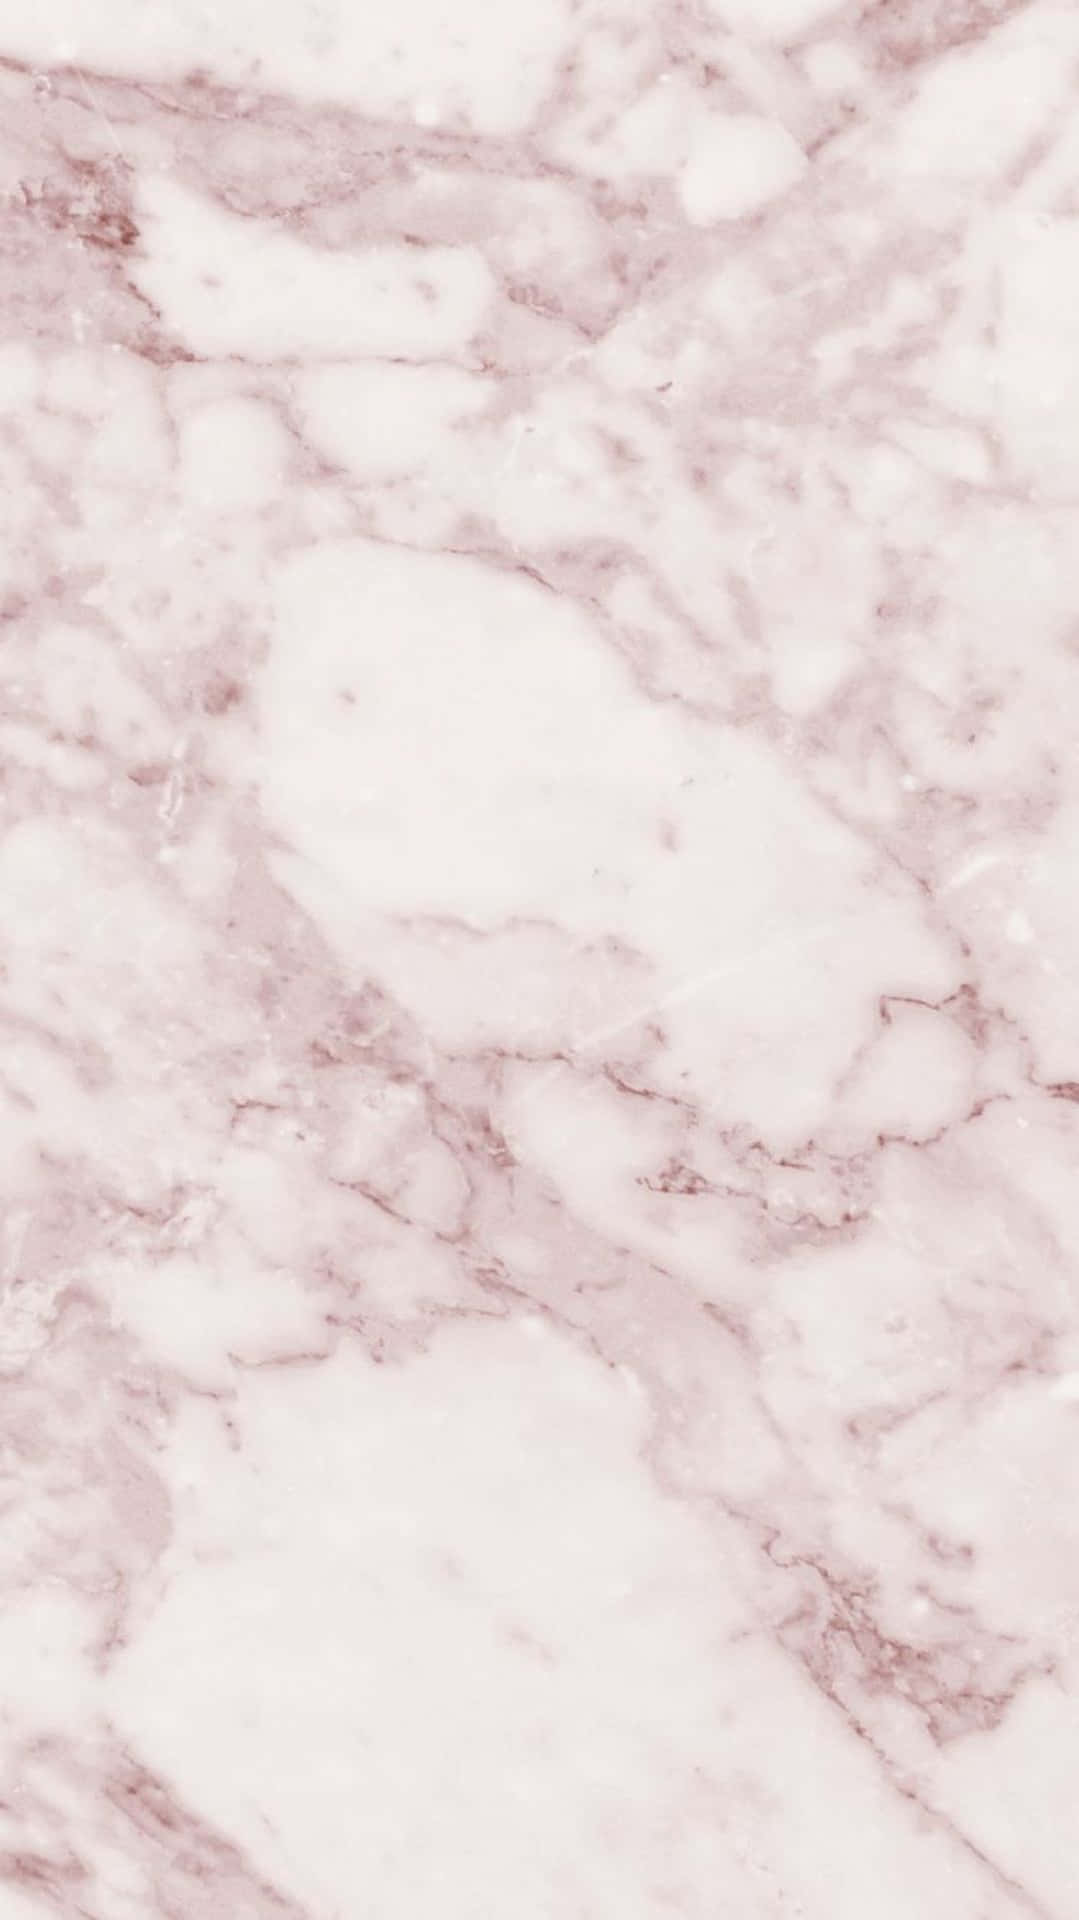 A classic combination of white and pink in this vibrant background